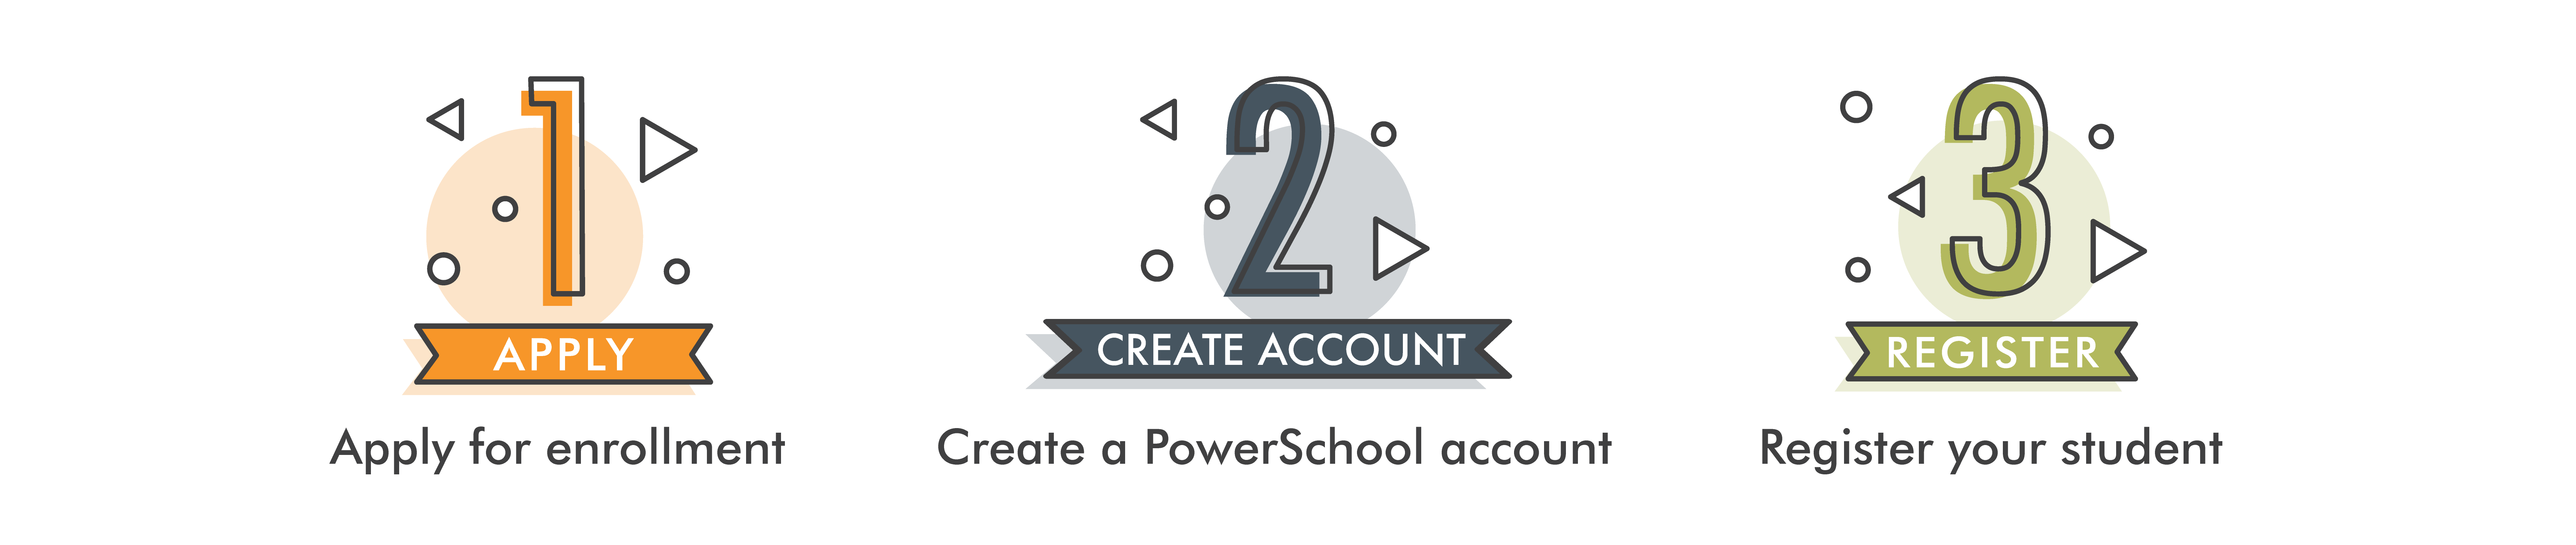 apply for enrollment, create a powerschool account, register your student